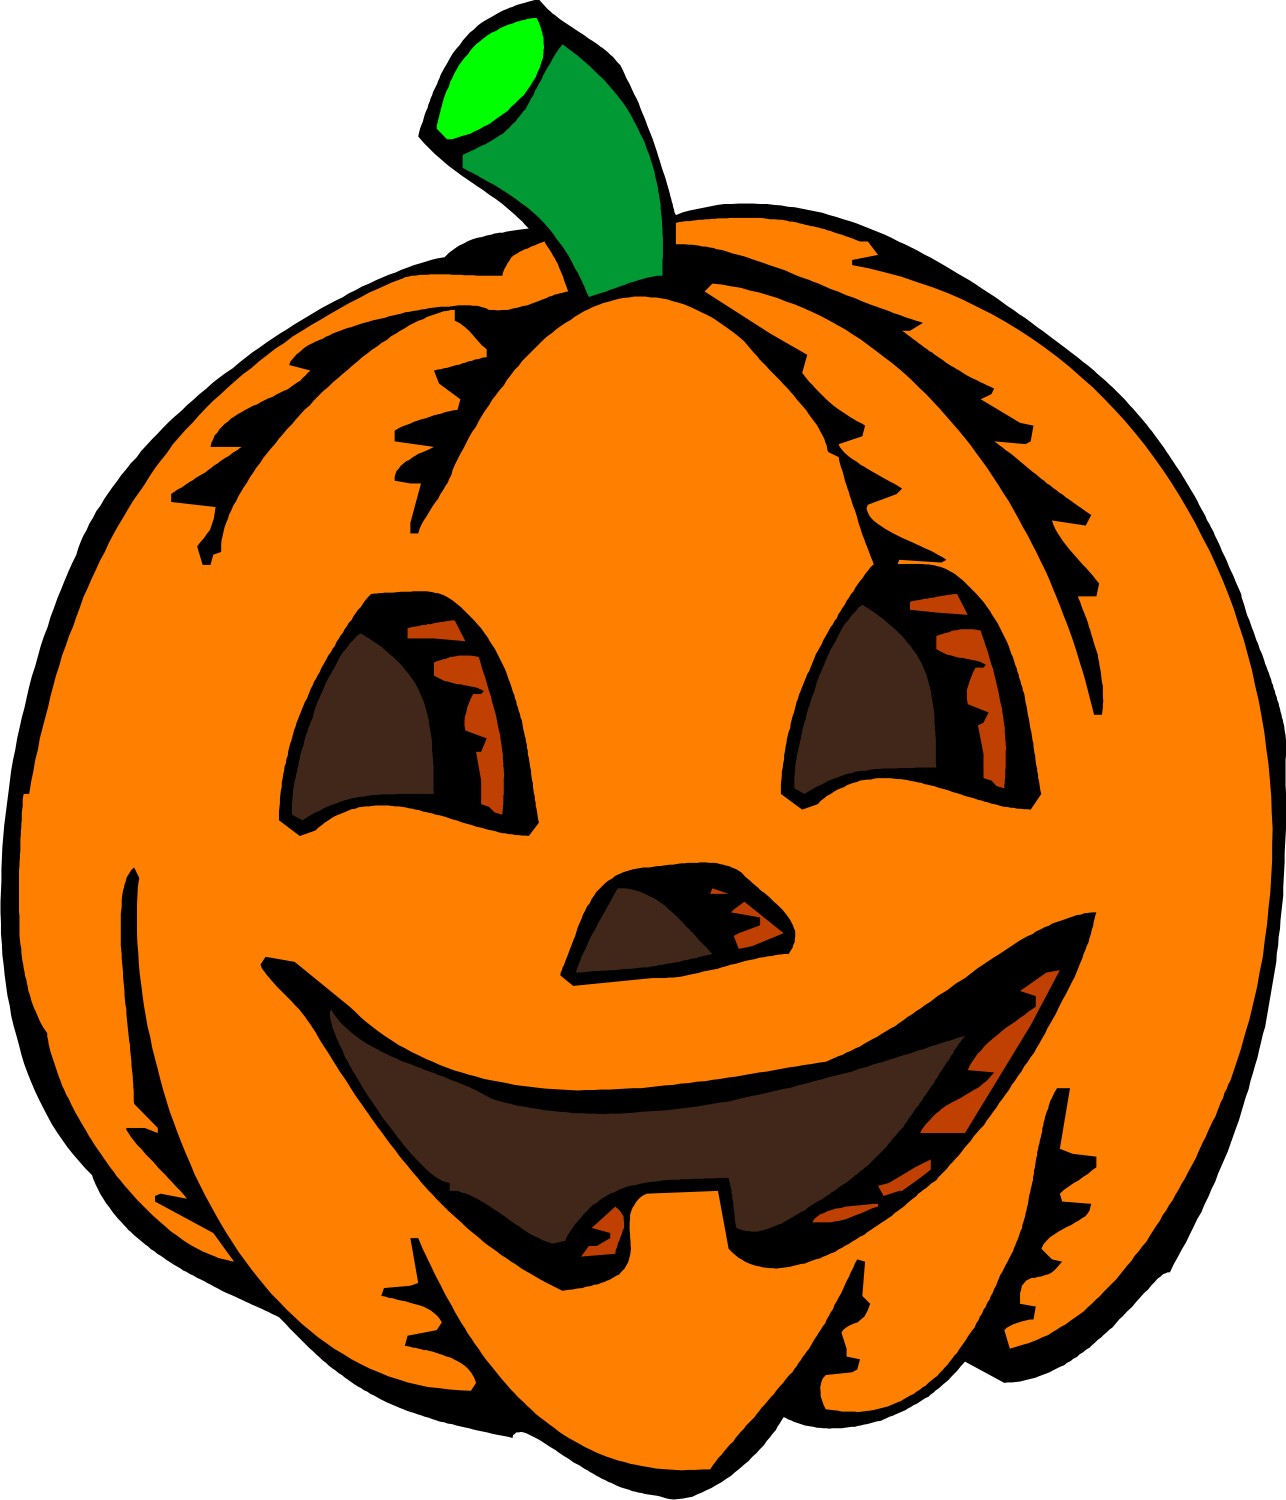 Scary Pumpkin Images   Clipart Best